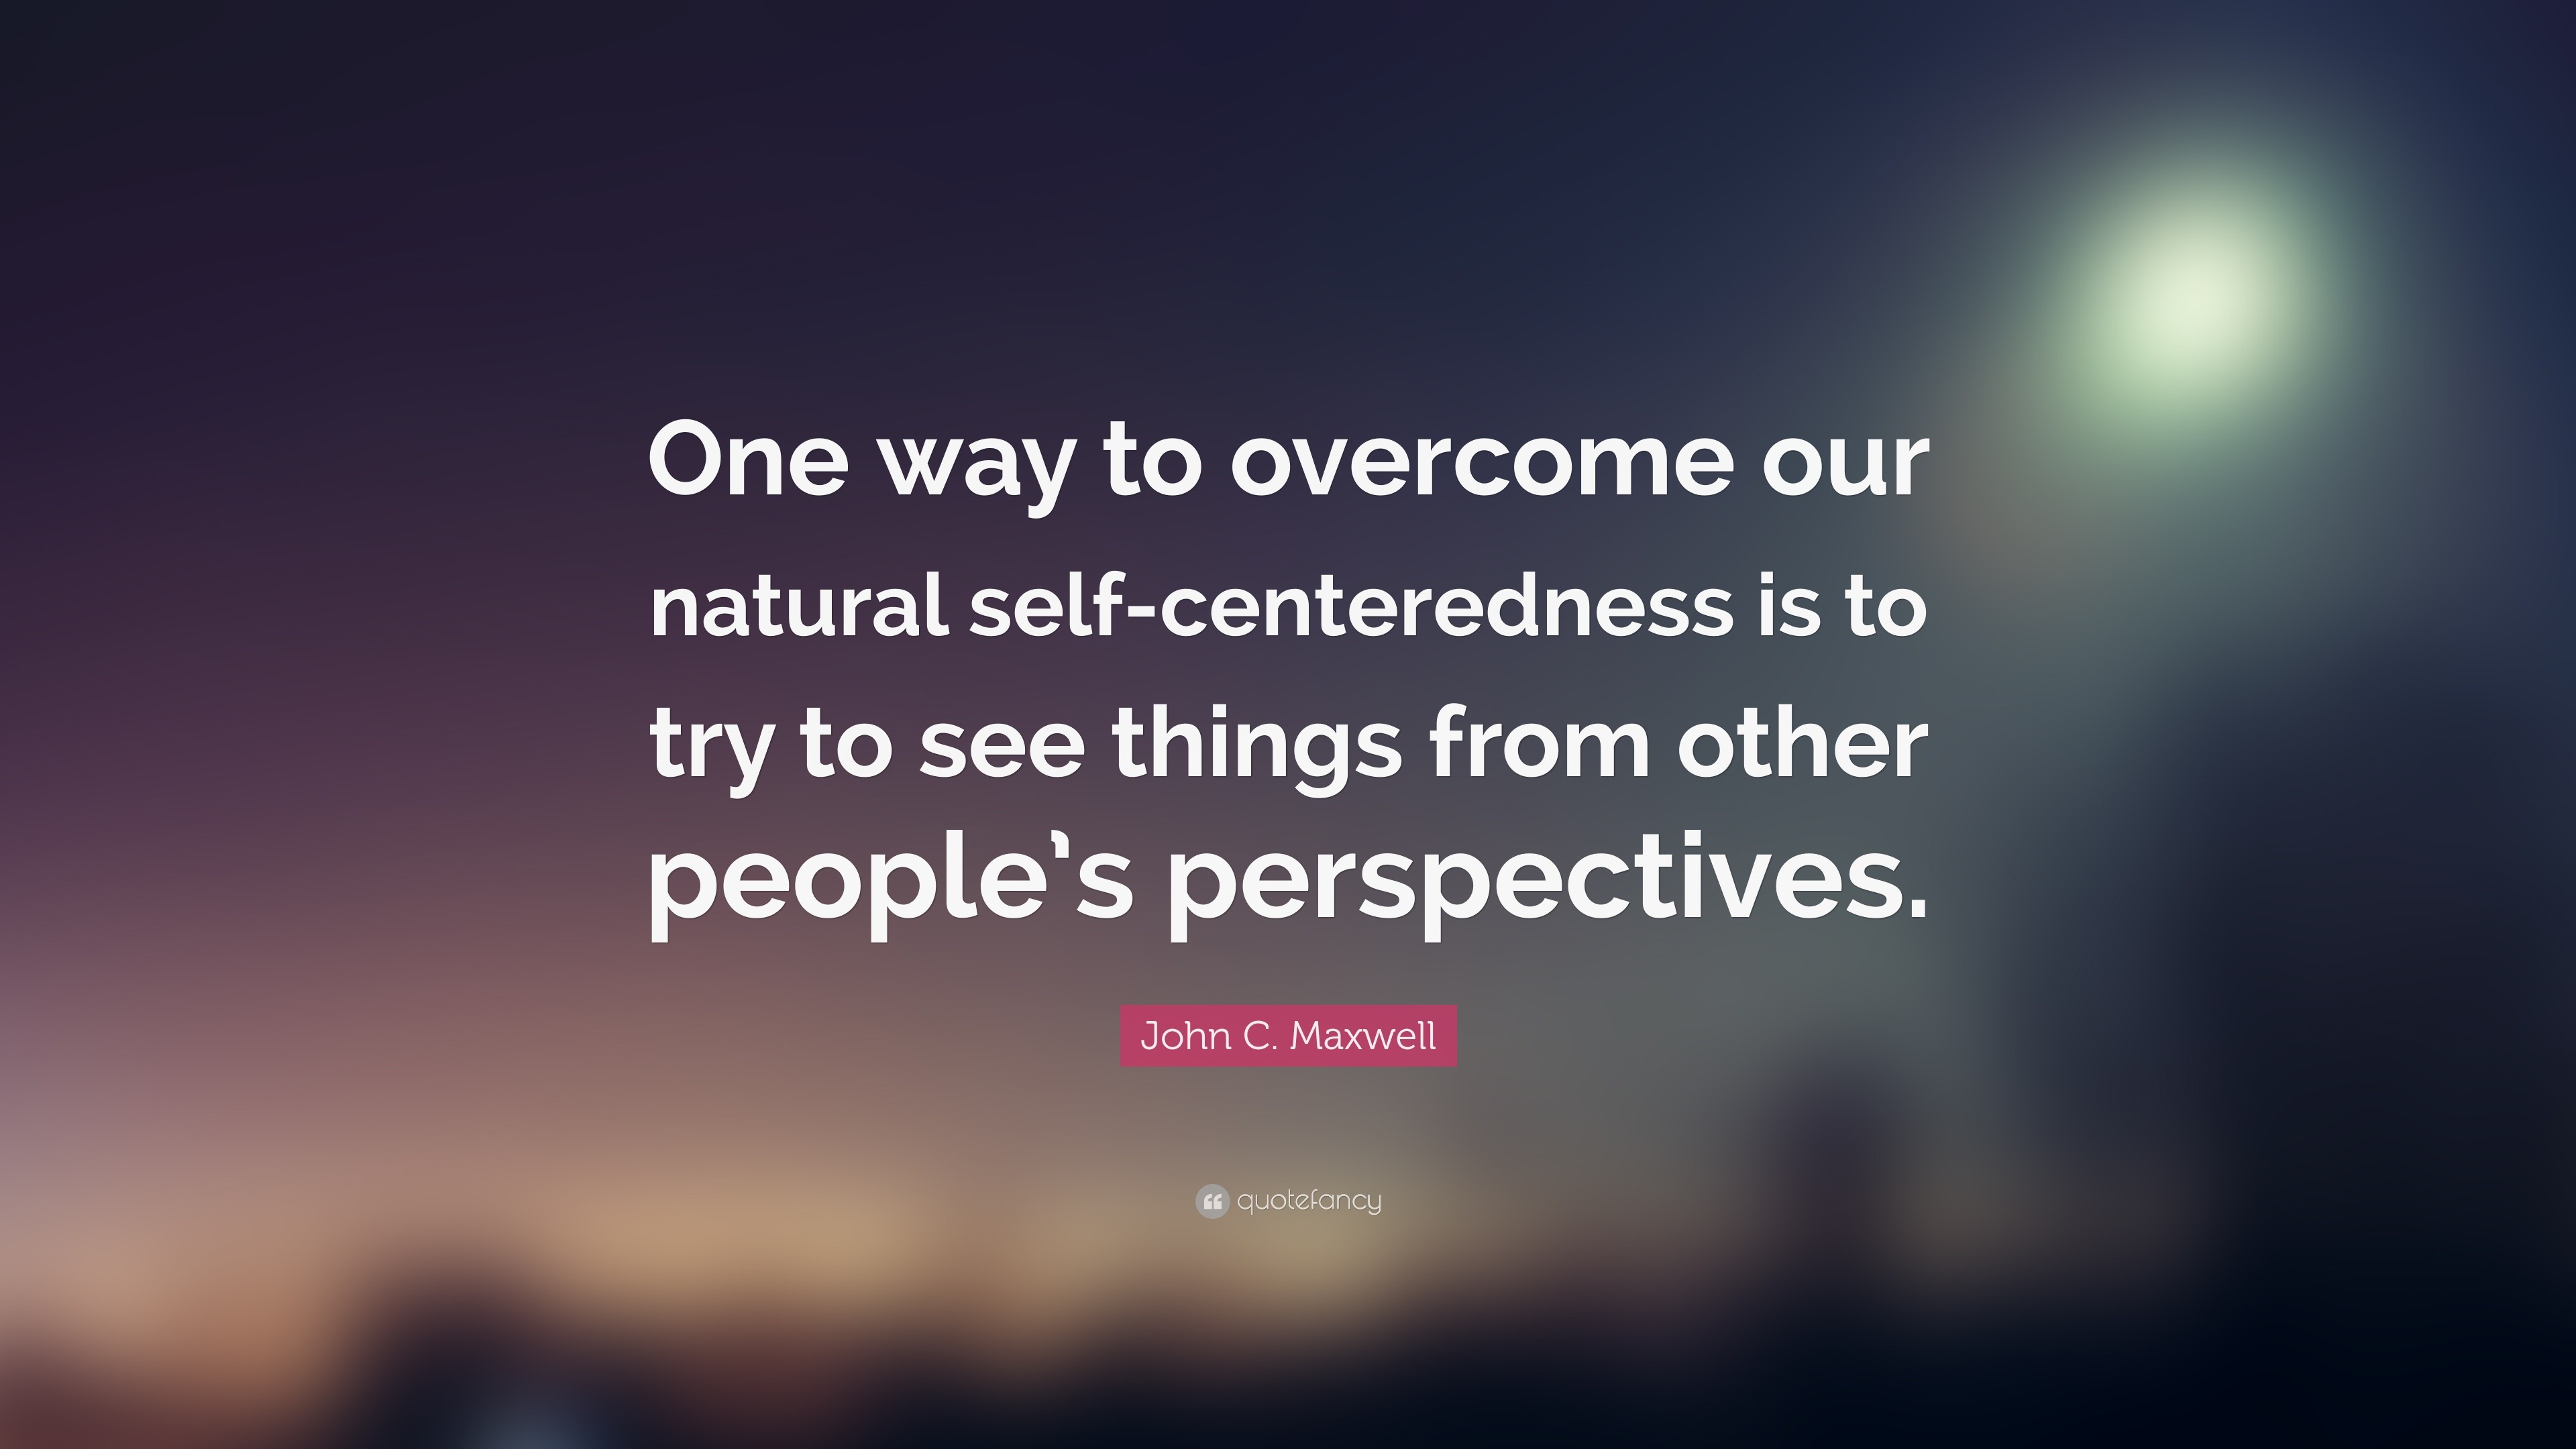 John C. Maxwell Quote: “One way to overcome our natural self